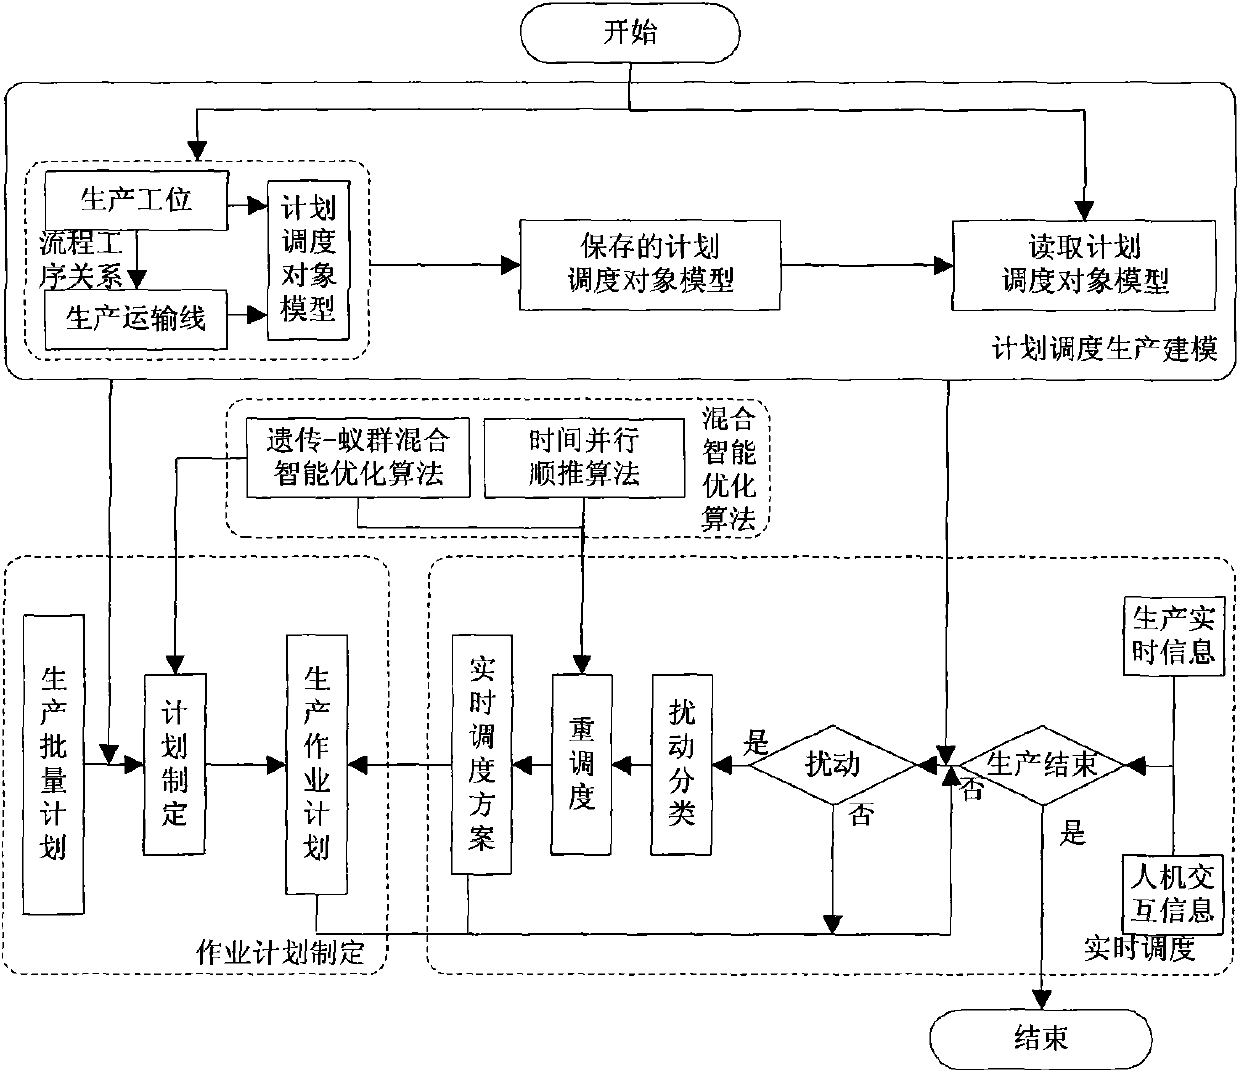 Steelmaking-continuous casting production operation plan and real-time dispatching optimization method and system based on mixed intelligent optimization algorithm